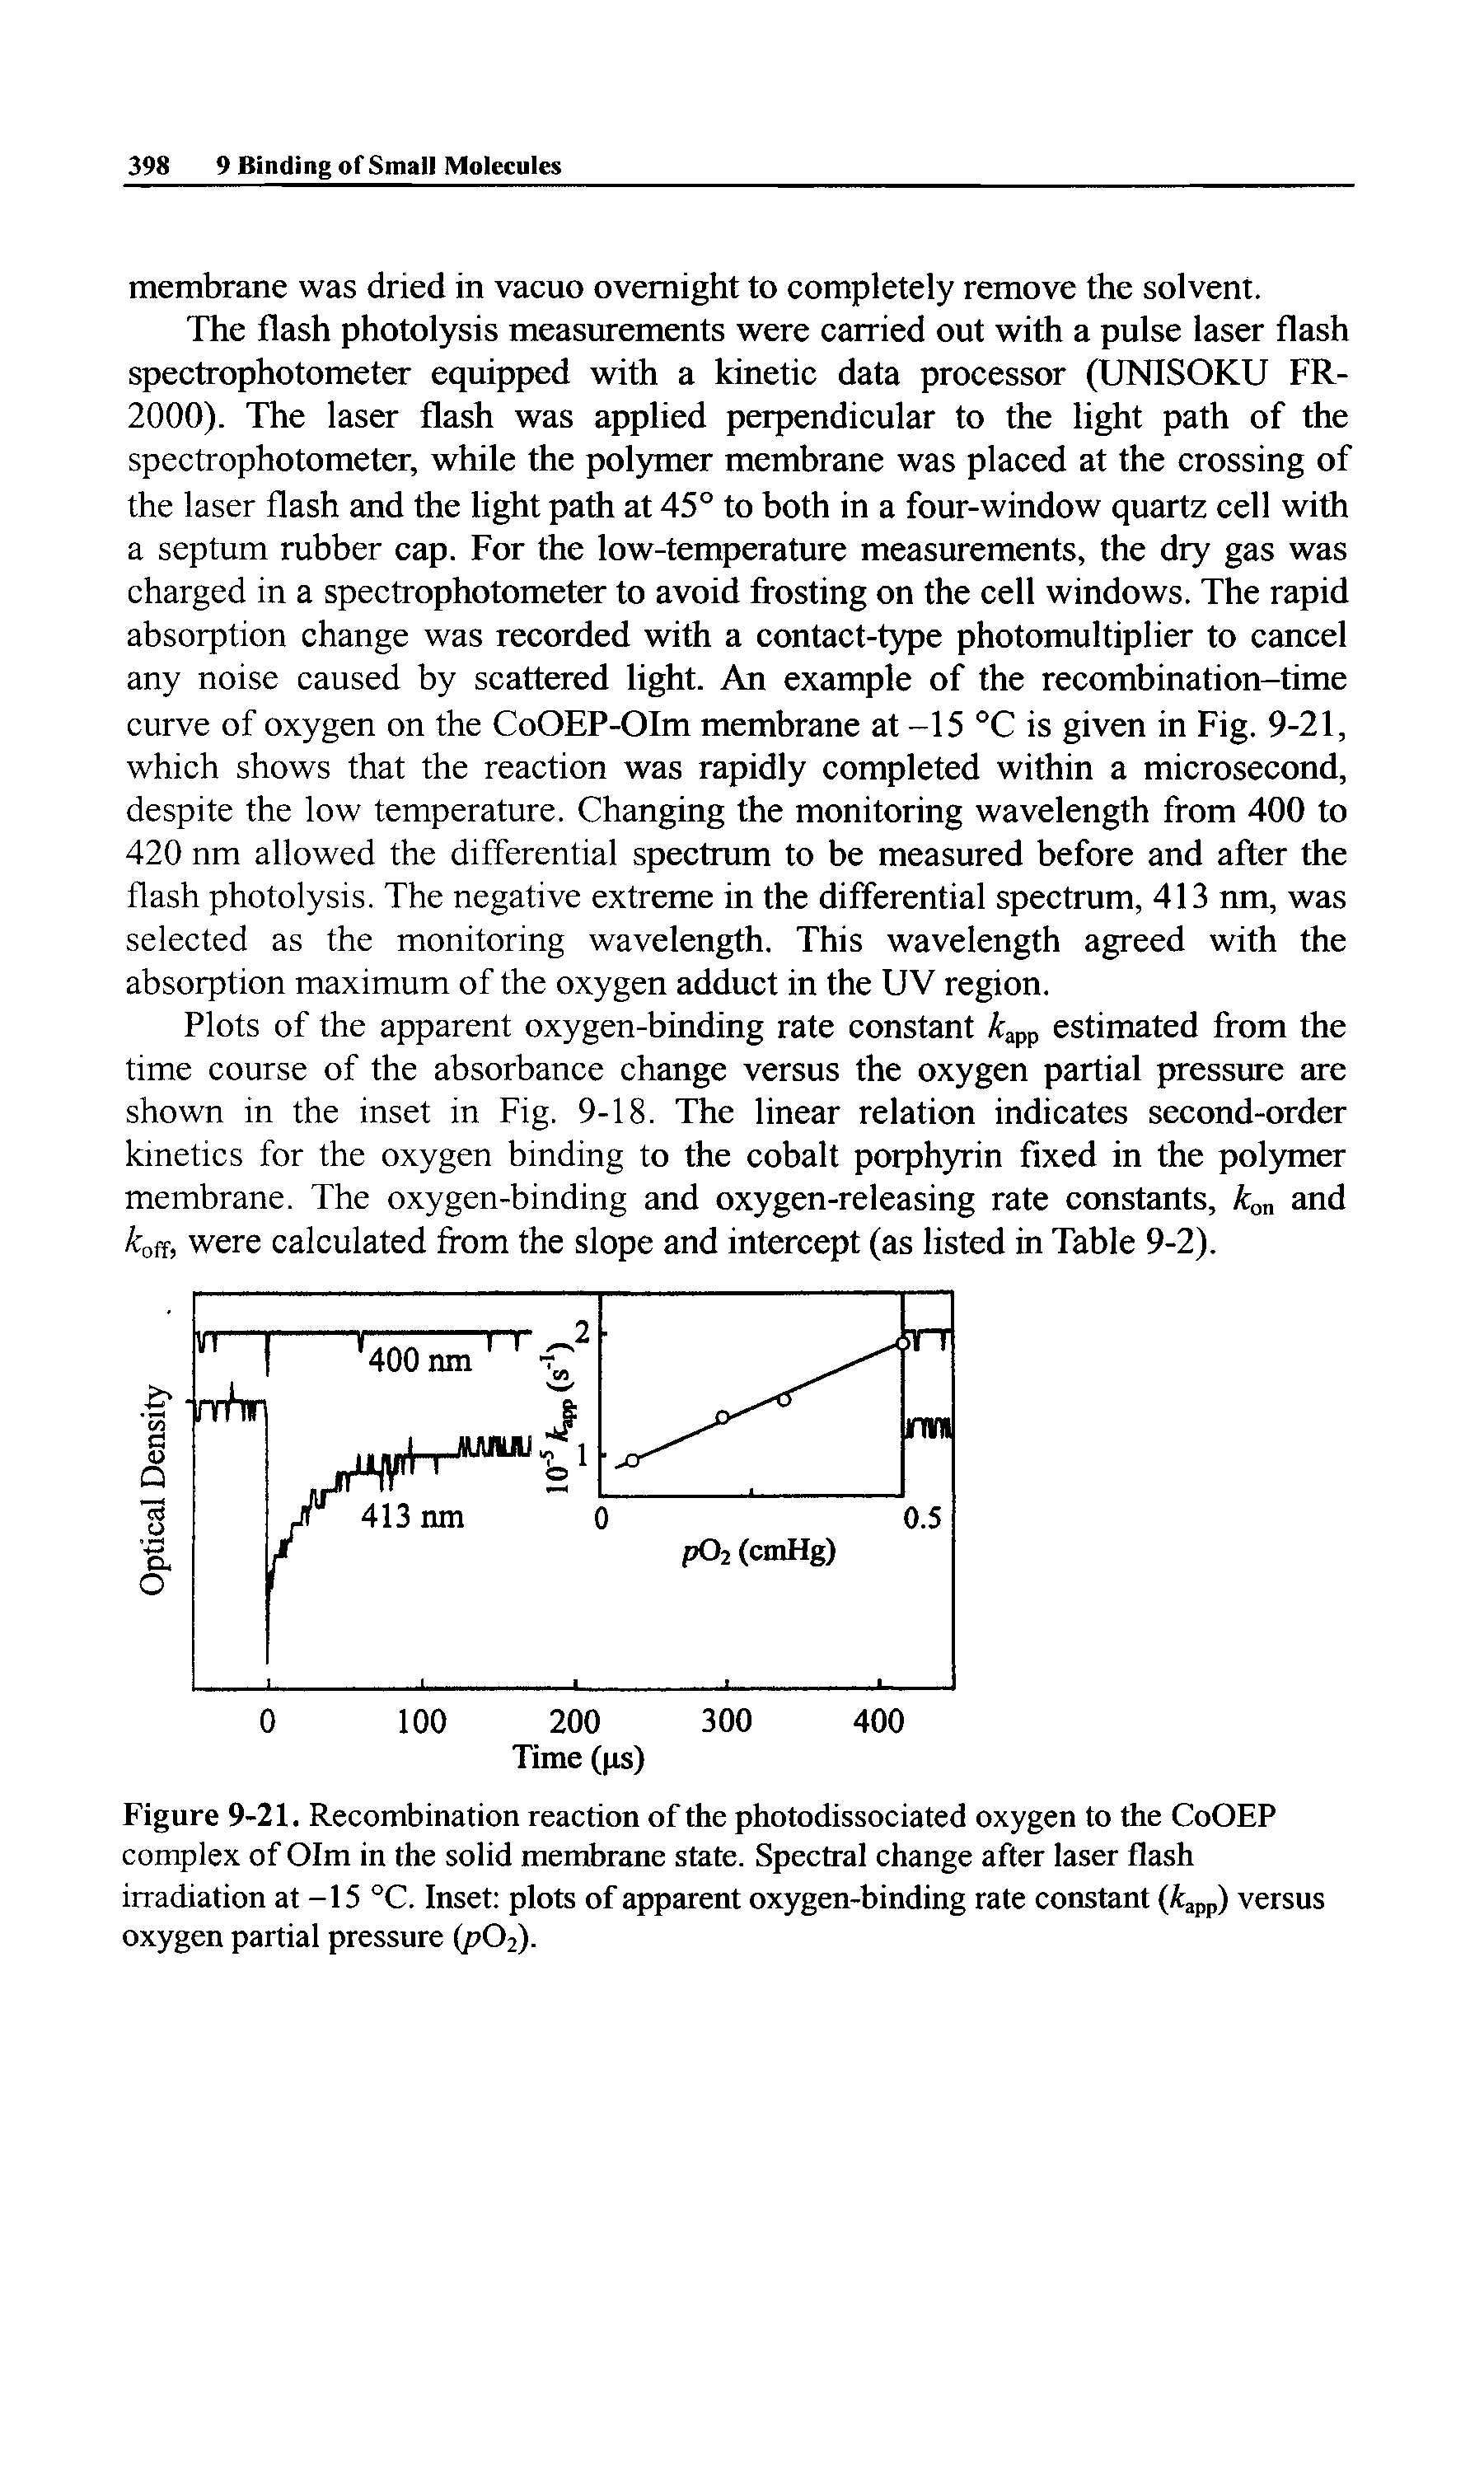 Figure 9-21. Recombination reaction of the photodissociated oxygen to the CoOEP complex of Olm in the solid membrane state. Spectral change after laser flash irradiation at -15 °C. Inset plots of apparent oxygen-binding rate constant ( pp) versus oxygen partial pressure (/7O2).